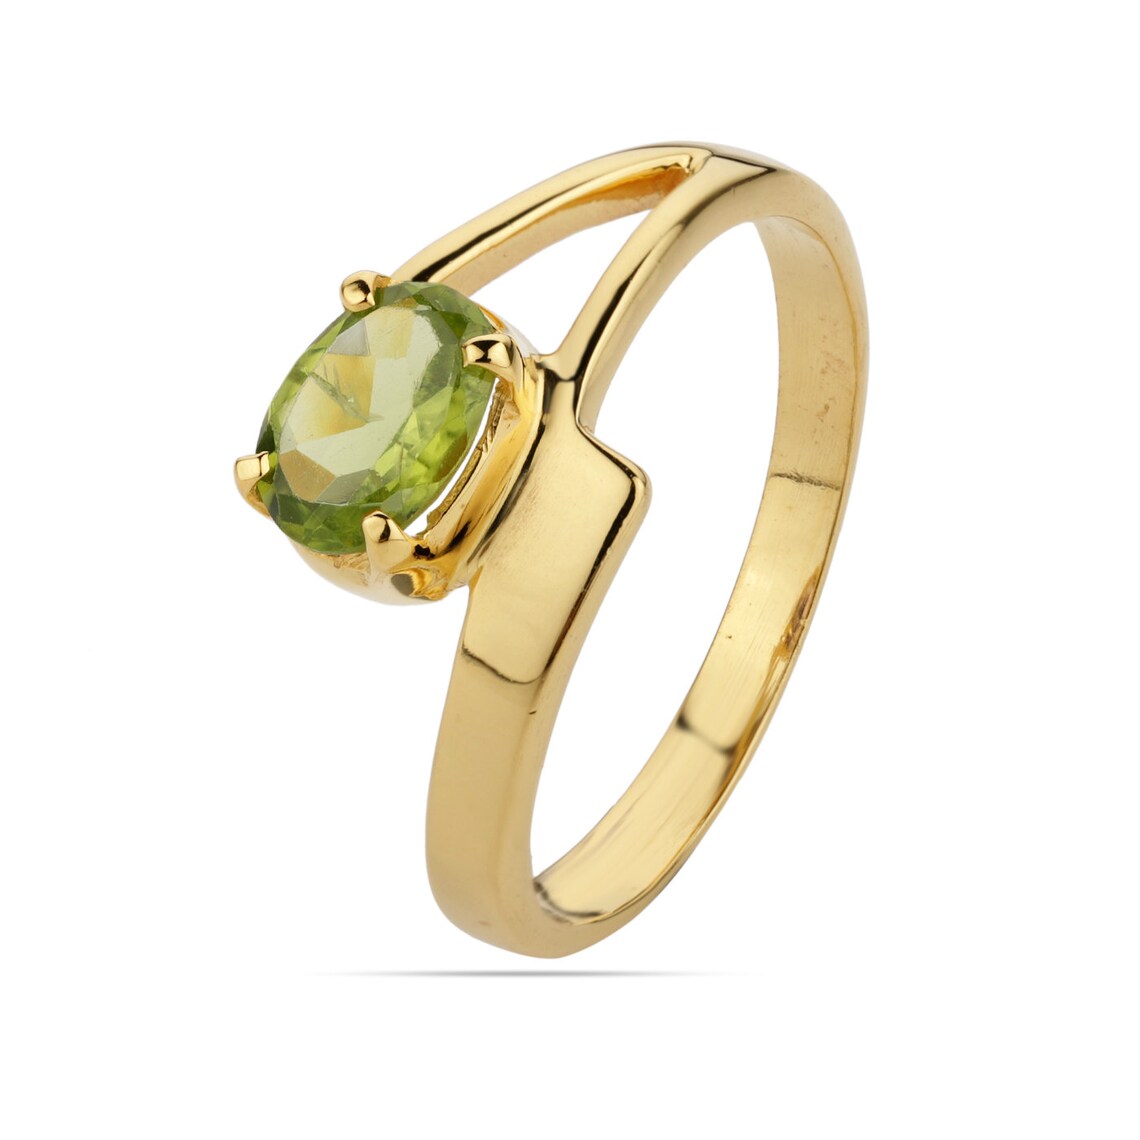 Green Peridot Oval Gold Ring, August Birthstone Ring